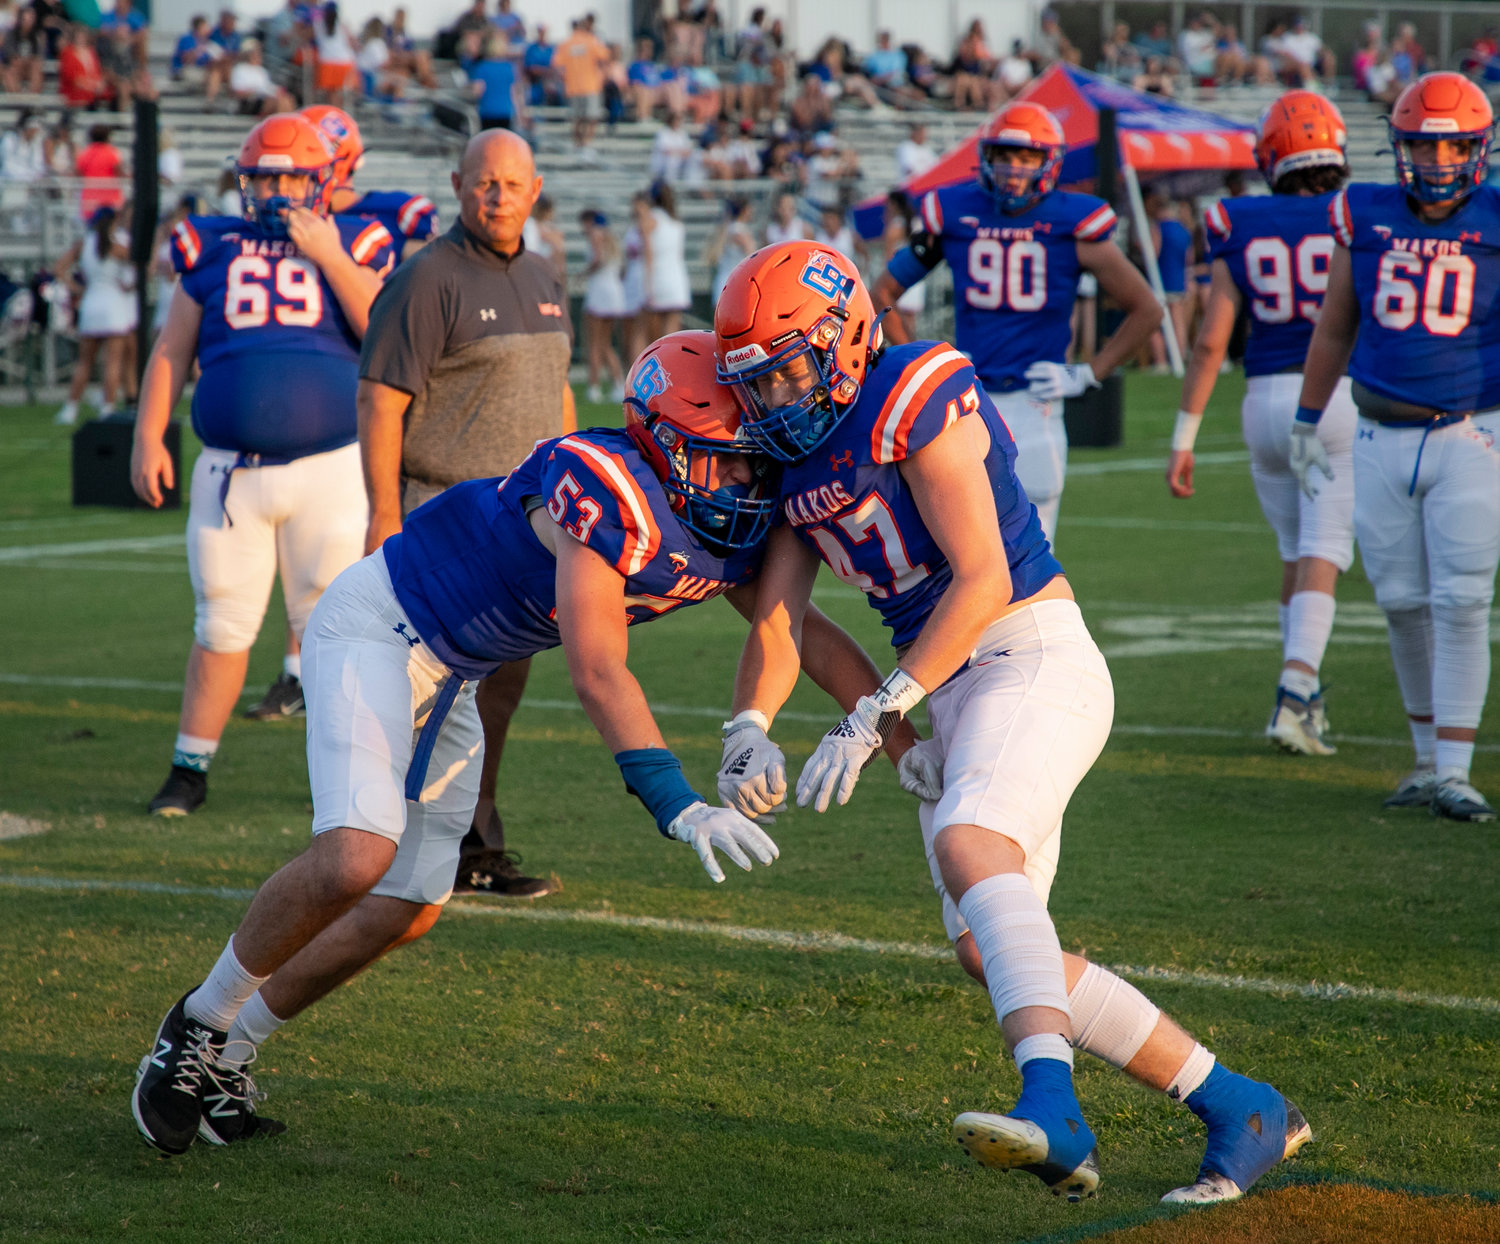 Logan Kruse (53), John Walker Colley (47) and the Orange Beach Makos warm up for their Class 4A Region 1 game against the T.R. Miller Tigers at home Sept. 16. Orange Beach will return to the Sportsplex this Friday to host its second consecutive first-round playoff game against B.T. Washington.